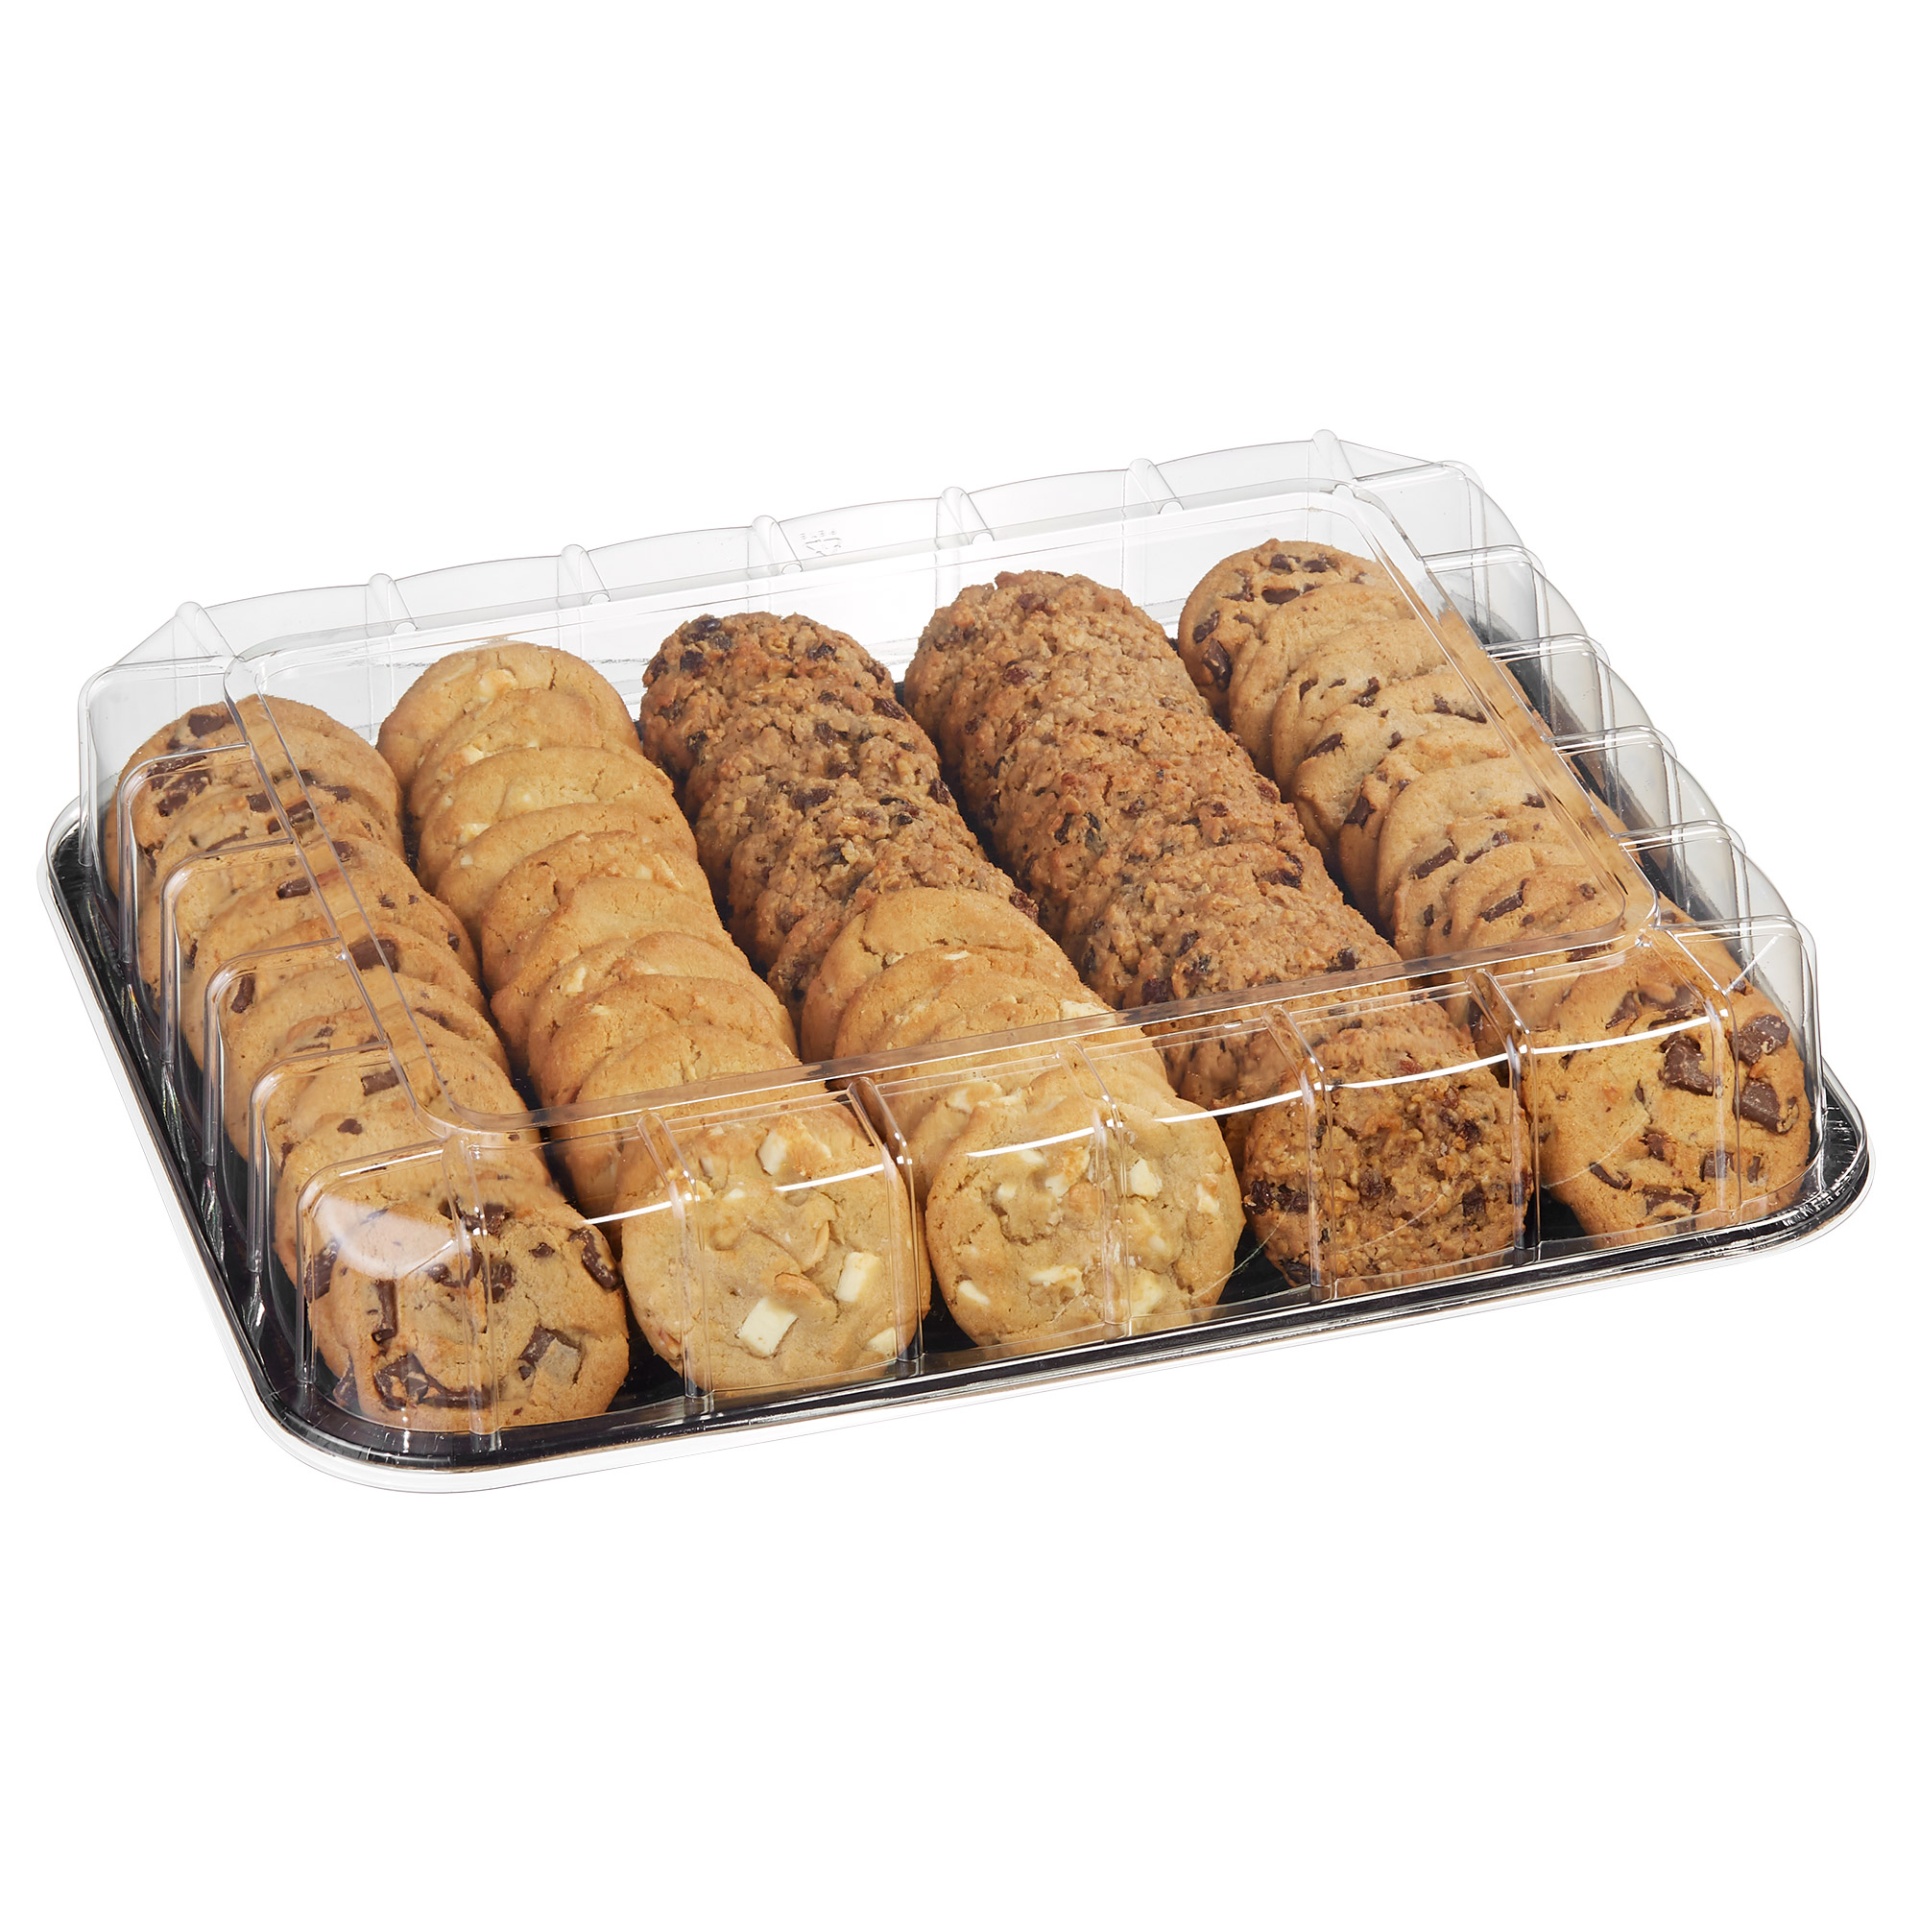 Costco Bakery Cookie Tray 60 ct Shipt